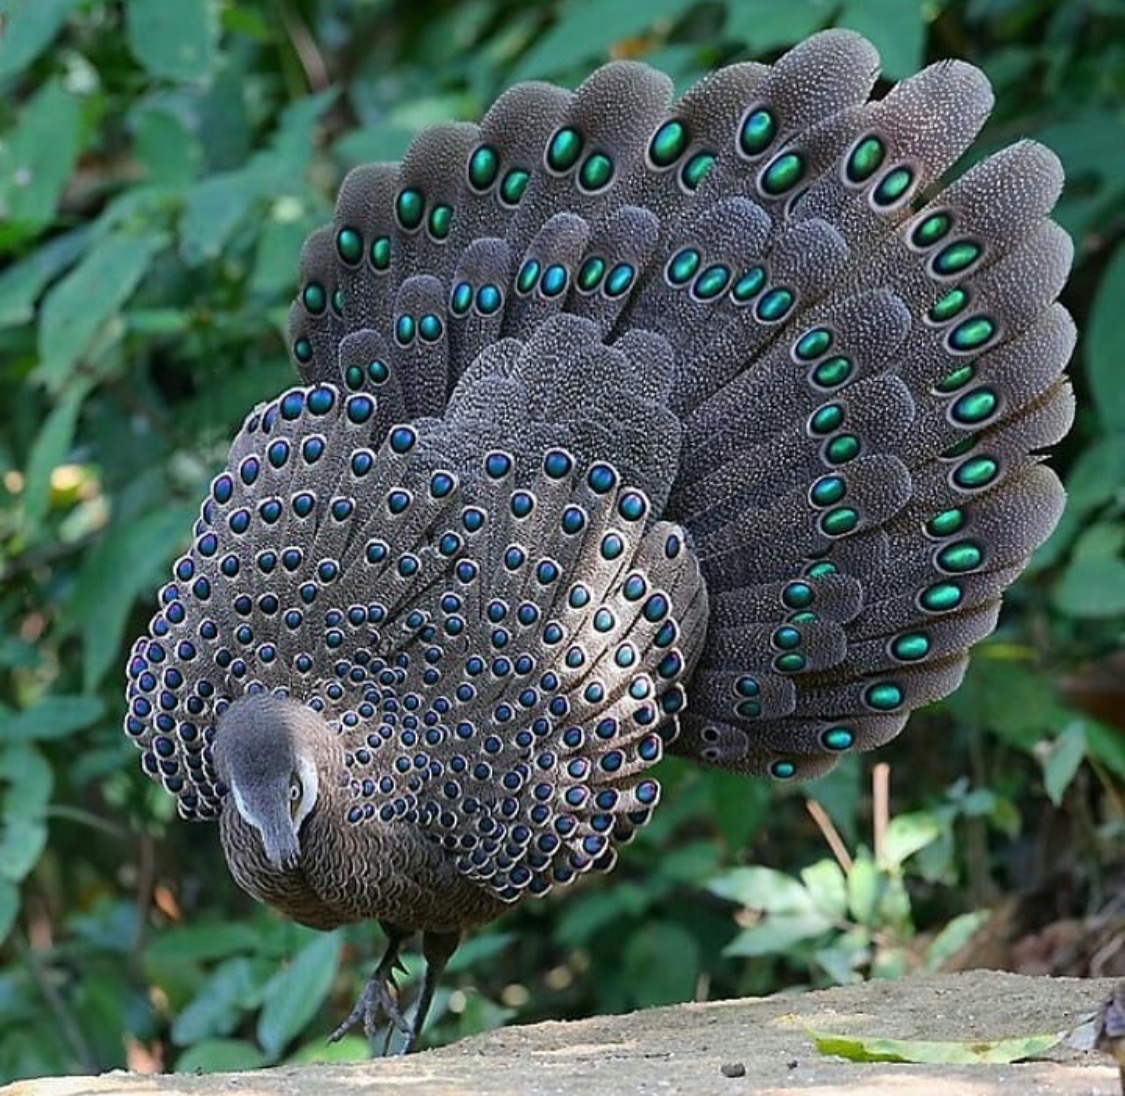 There’s something incredibly regal about peacocks